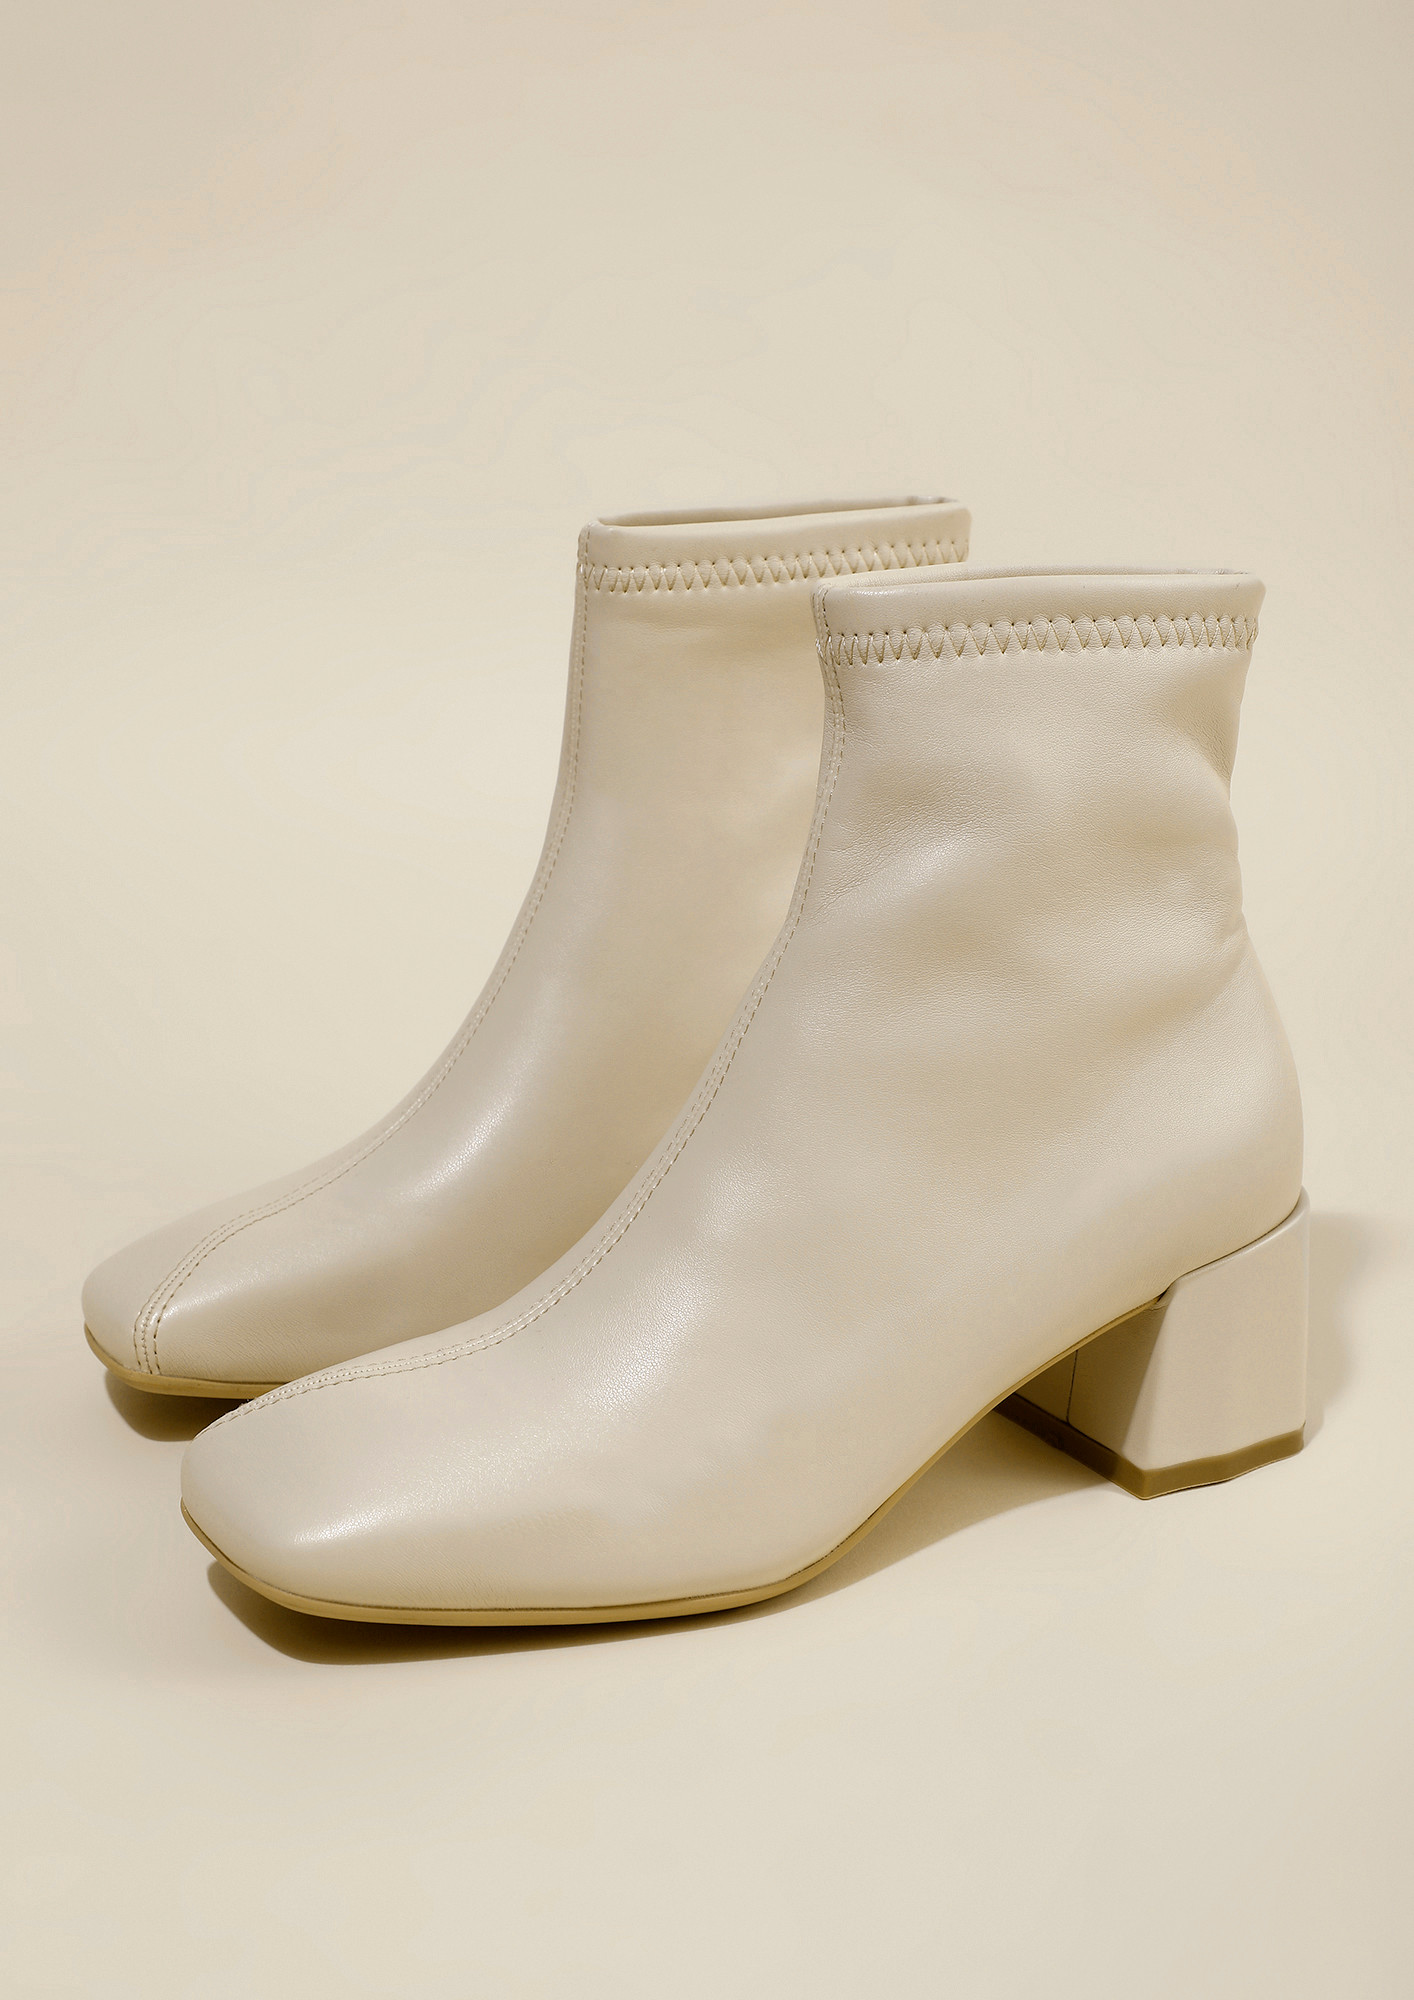 White Faux Snake Ankle Boot | Shoes | White ankle boots, Shoe boots, Boots